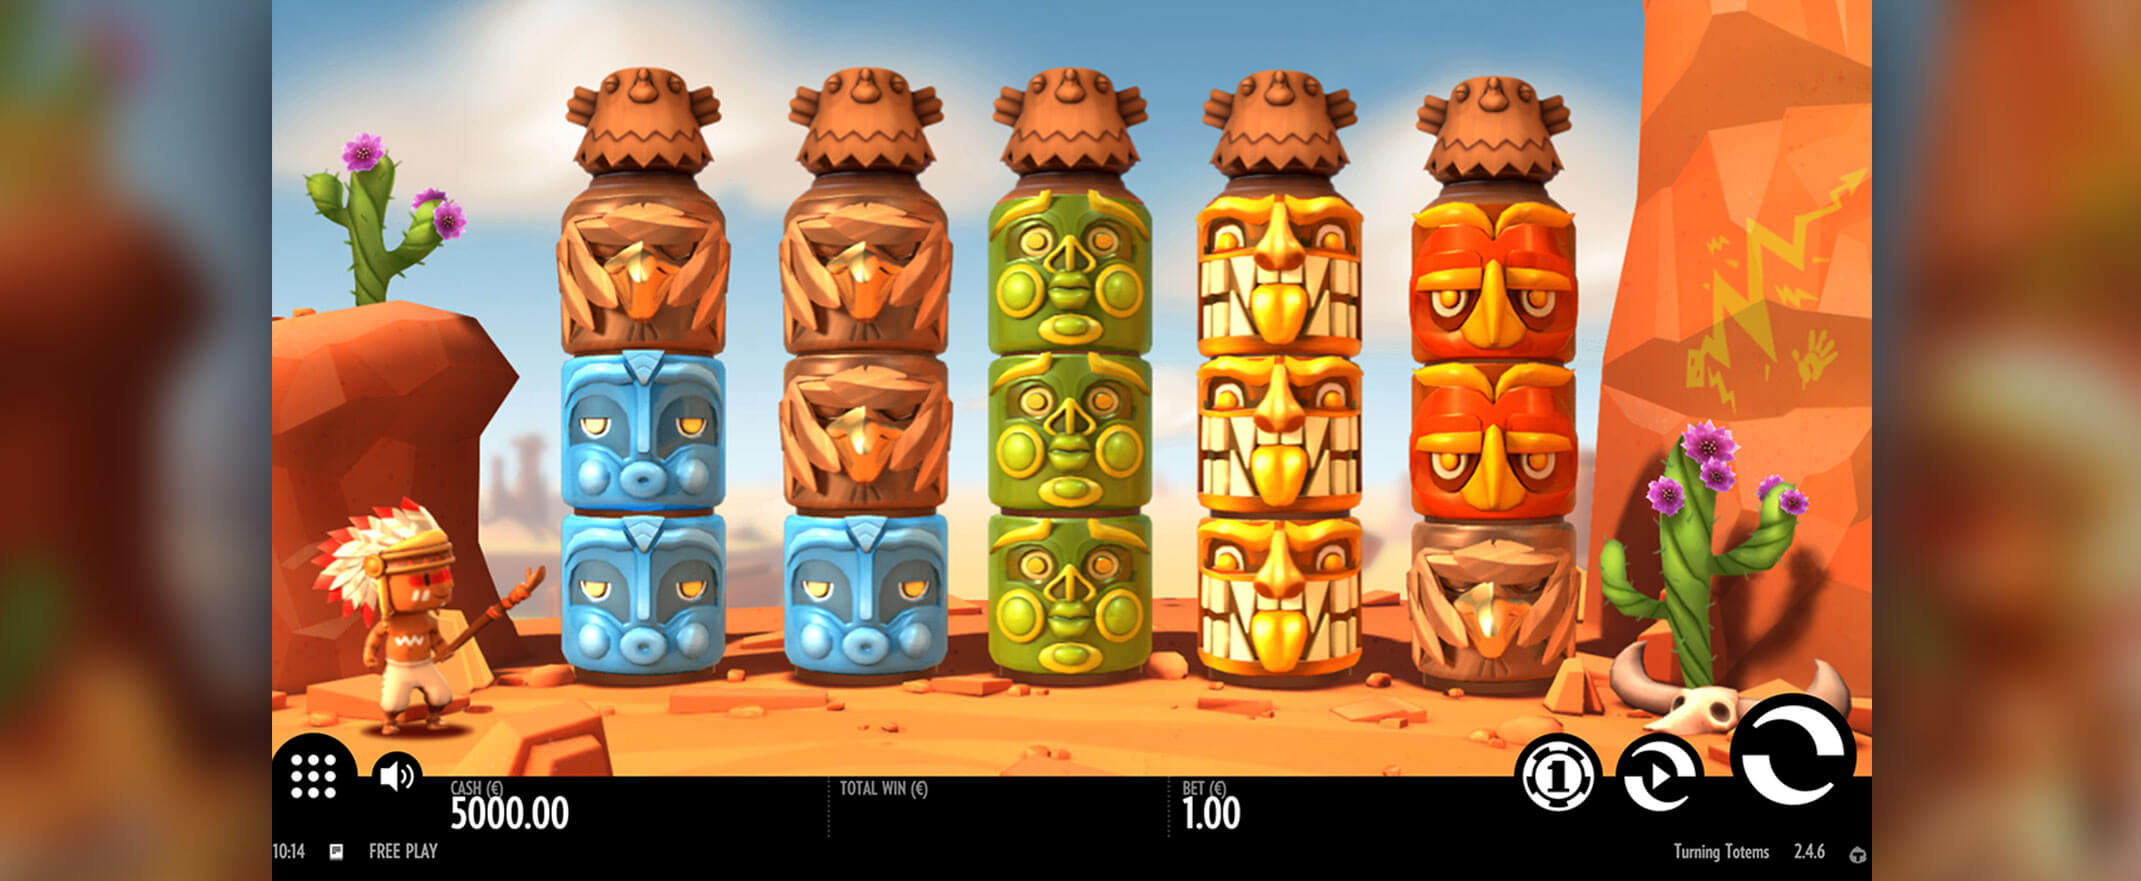 Turning Totems slot review